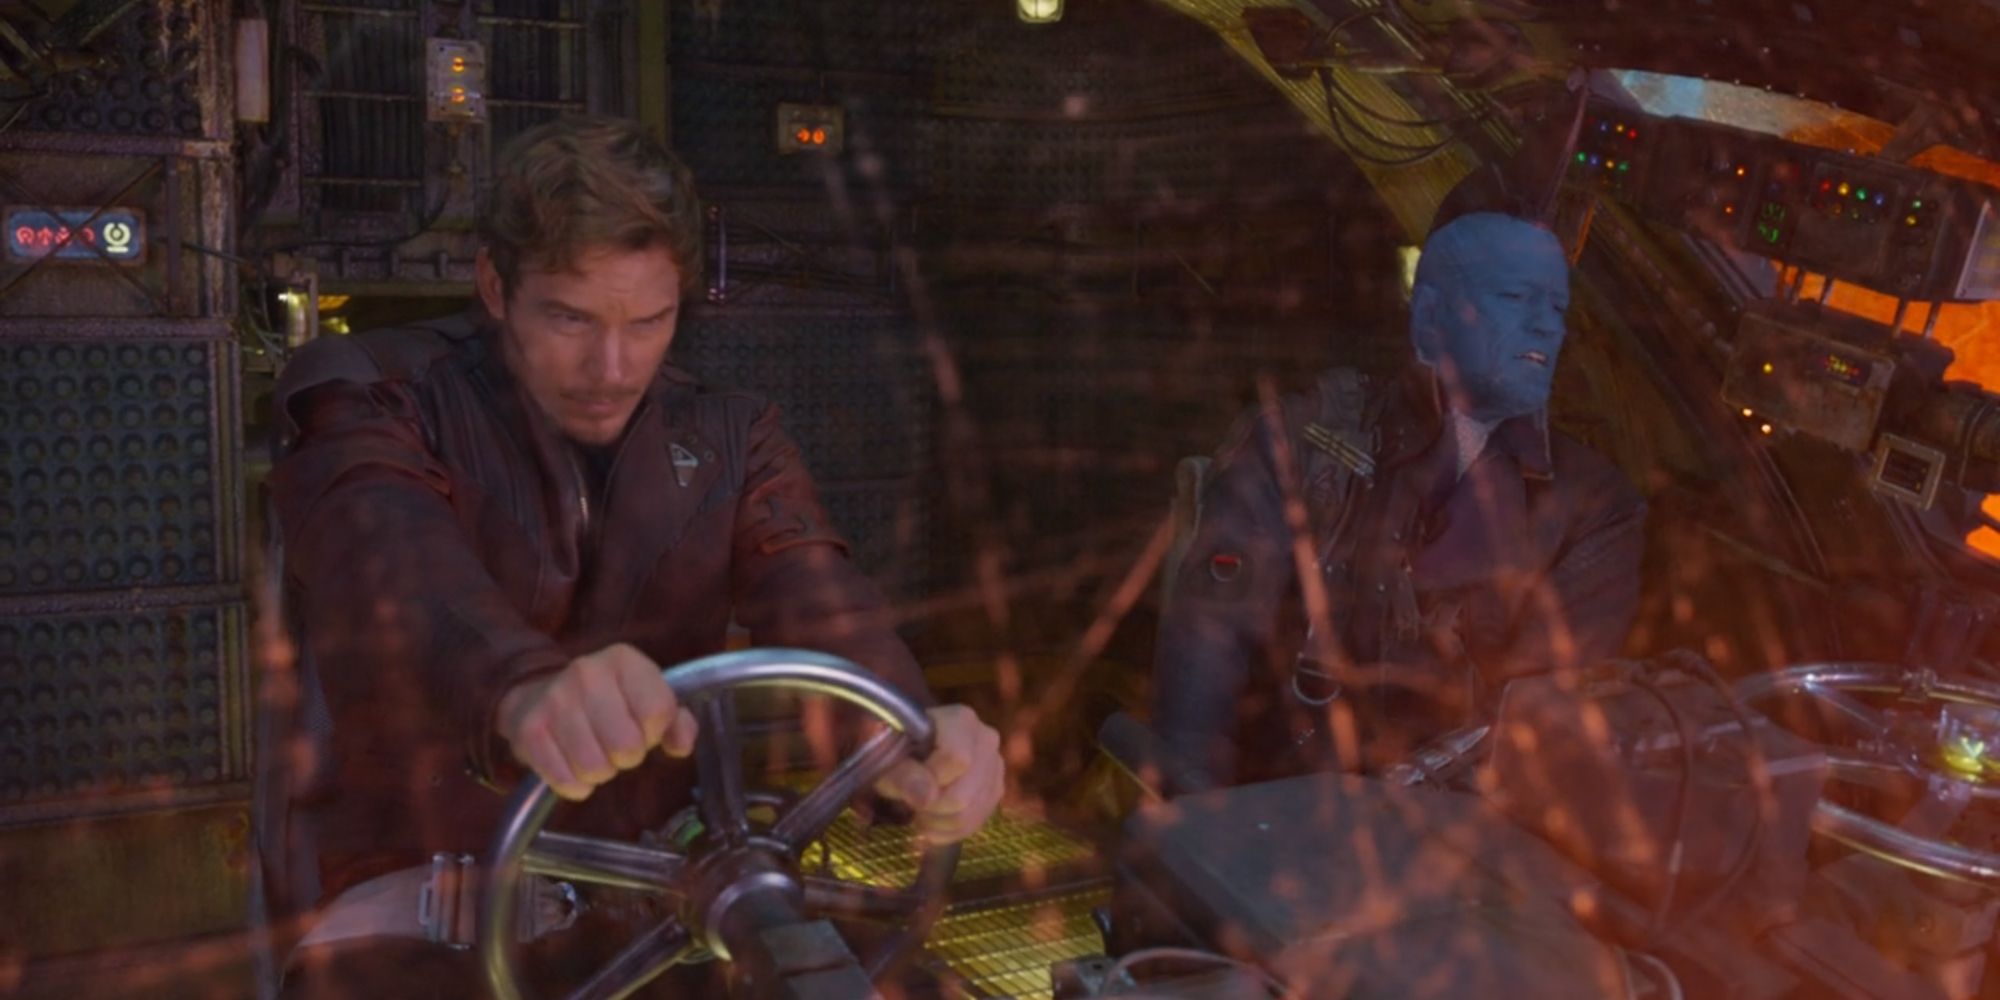 Star Lord and Yondu Udonta piloting a Ravager ship in Guardians Of The Galaxy Vol. 2